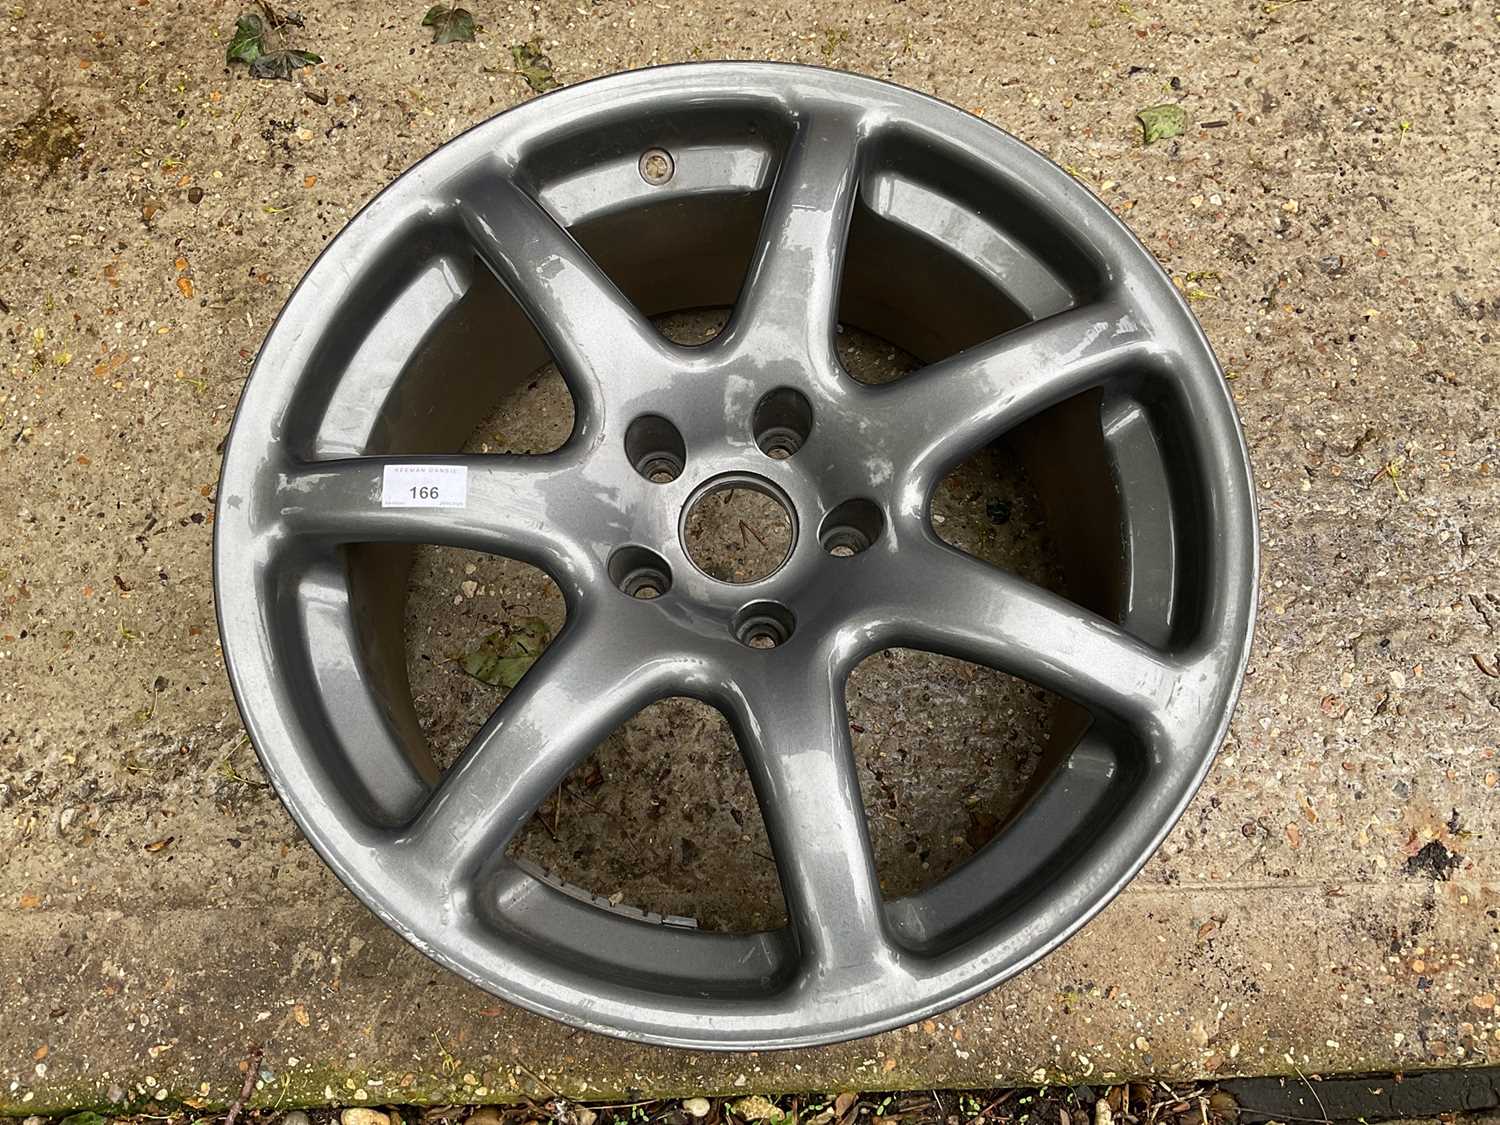 Lot 166 - TVR Tuscan Spider alloy wheel (rear fitting)